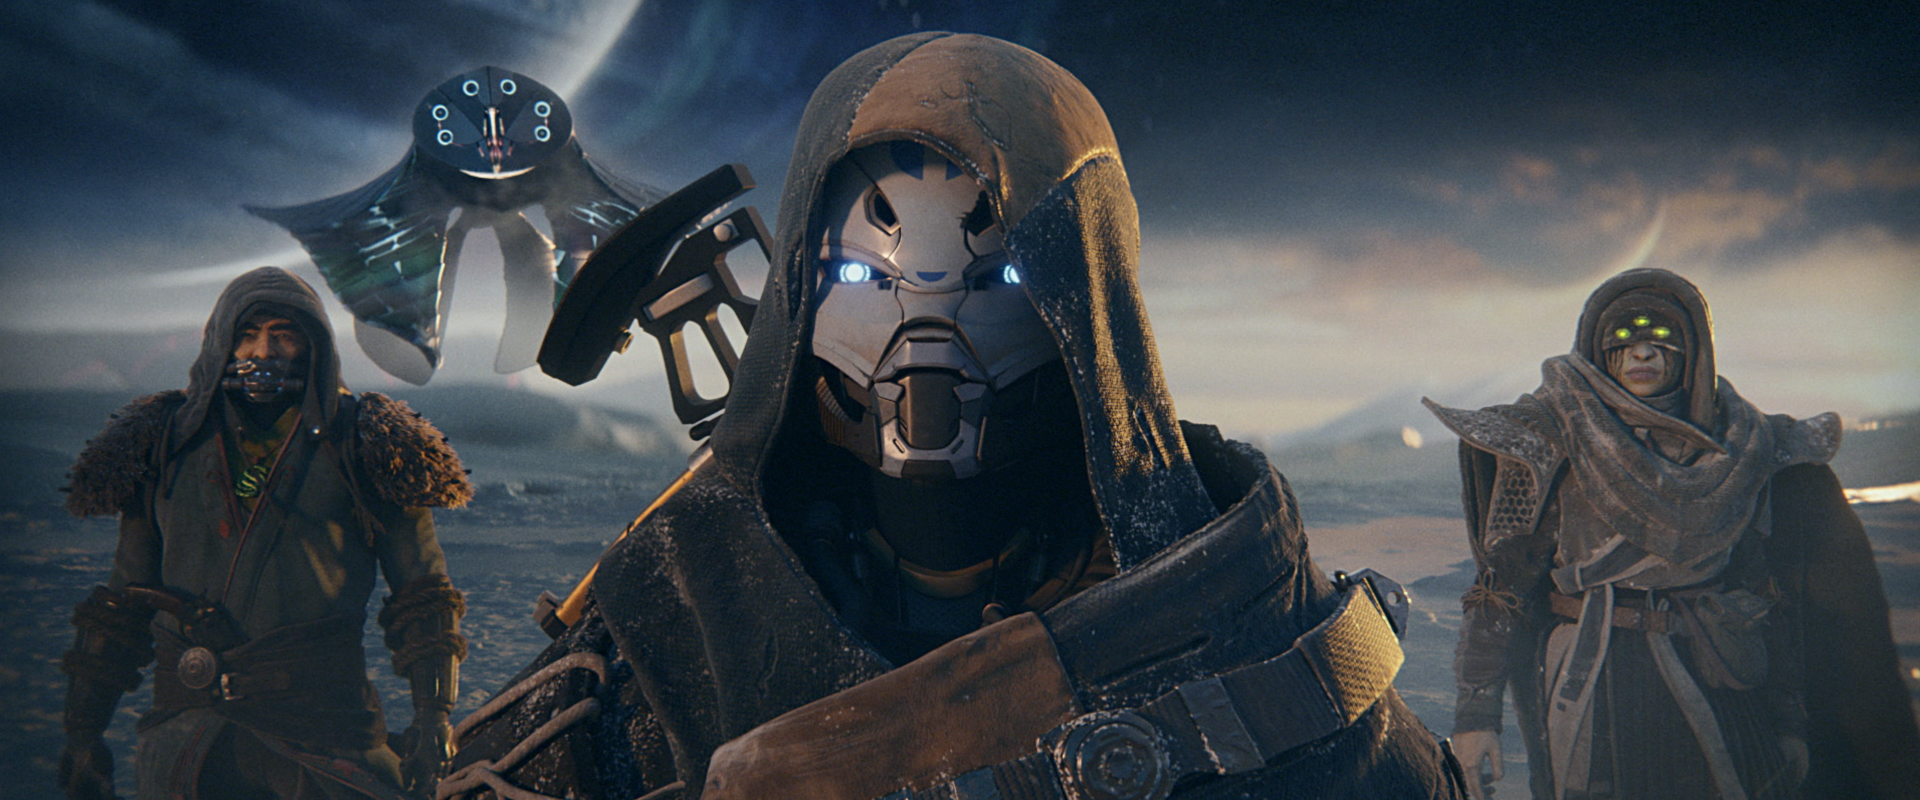 The Gaming World Reacts To Sony Buying 'Destiny' Developer Bungie